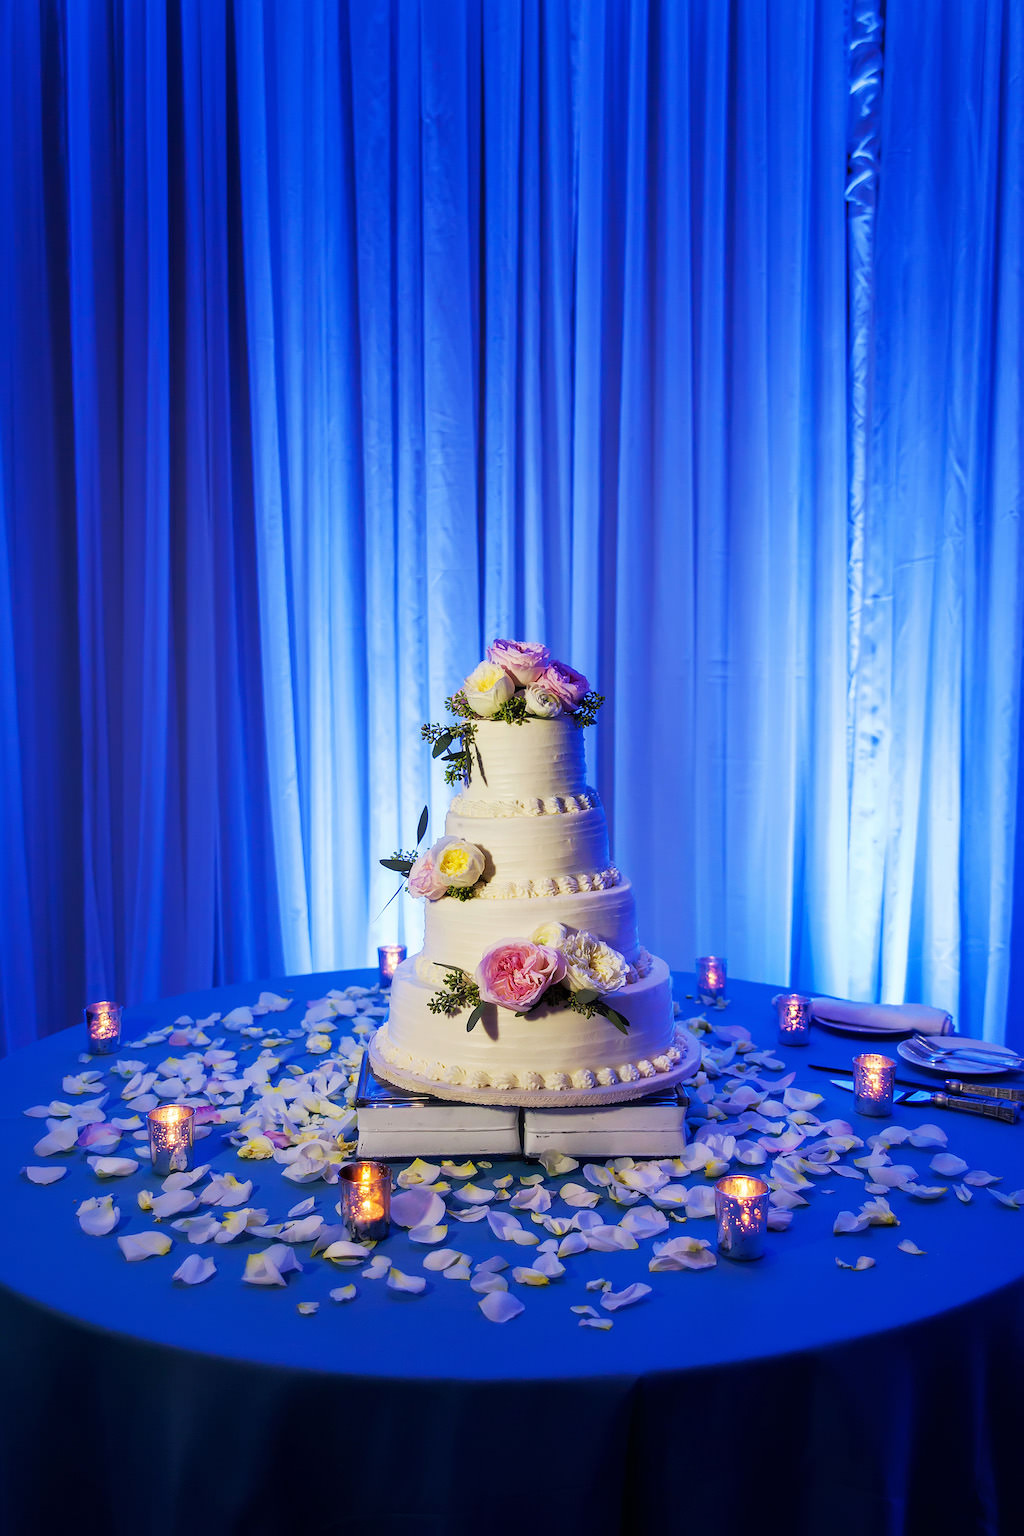 Four Tier Round White Wedding Cake on Book Cakestand with Pink and Yellow ROse with Greenery, Rose PEtals and Votive Candles on Blue Linen Table with Blue Draping and Uplighting